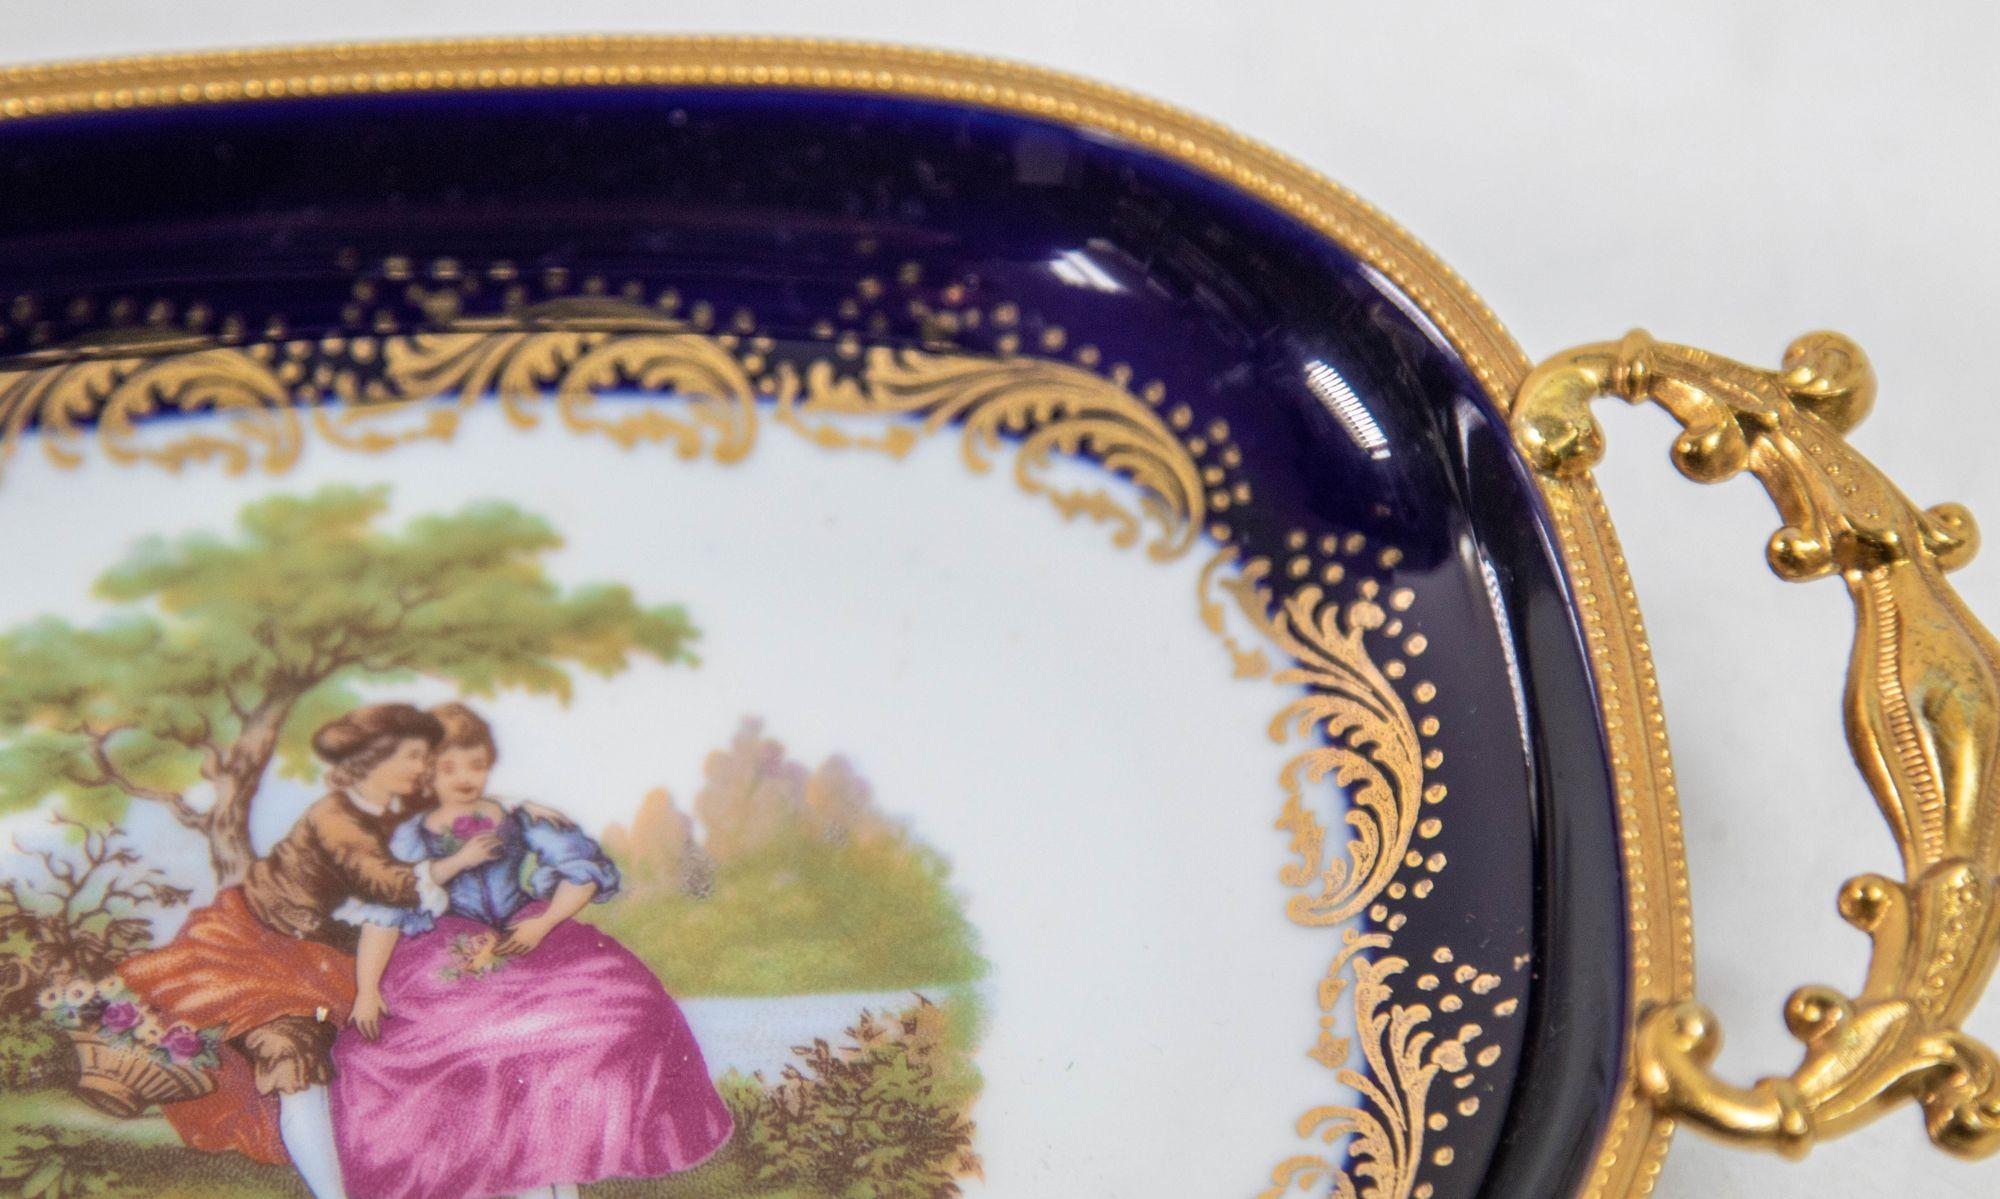 Limoges France Dish in Royal Blue with Fragonard Couple and Fine Gold Metal Trim For Sale 8